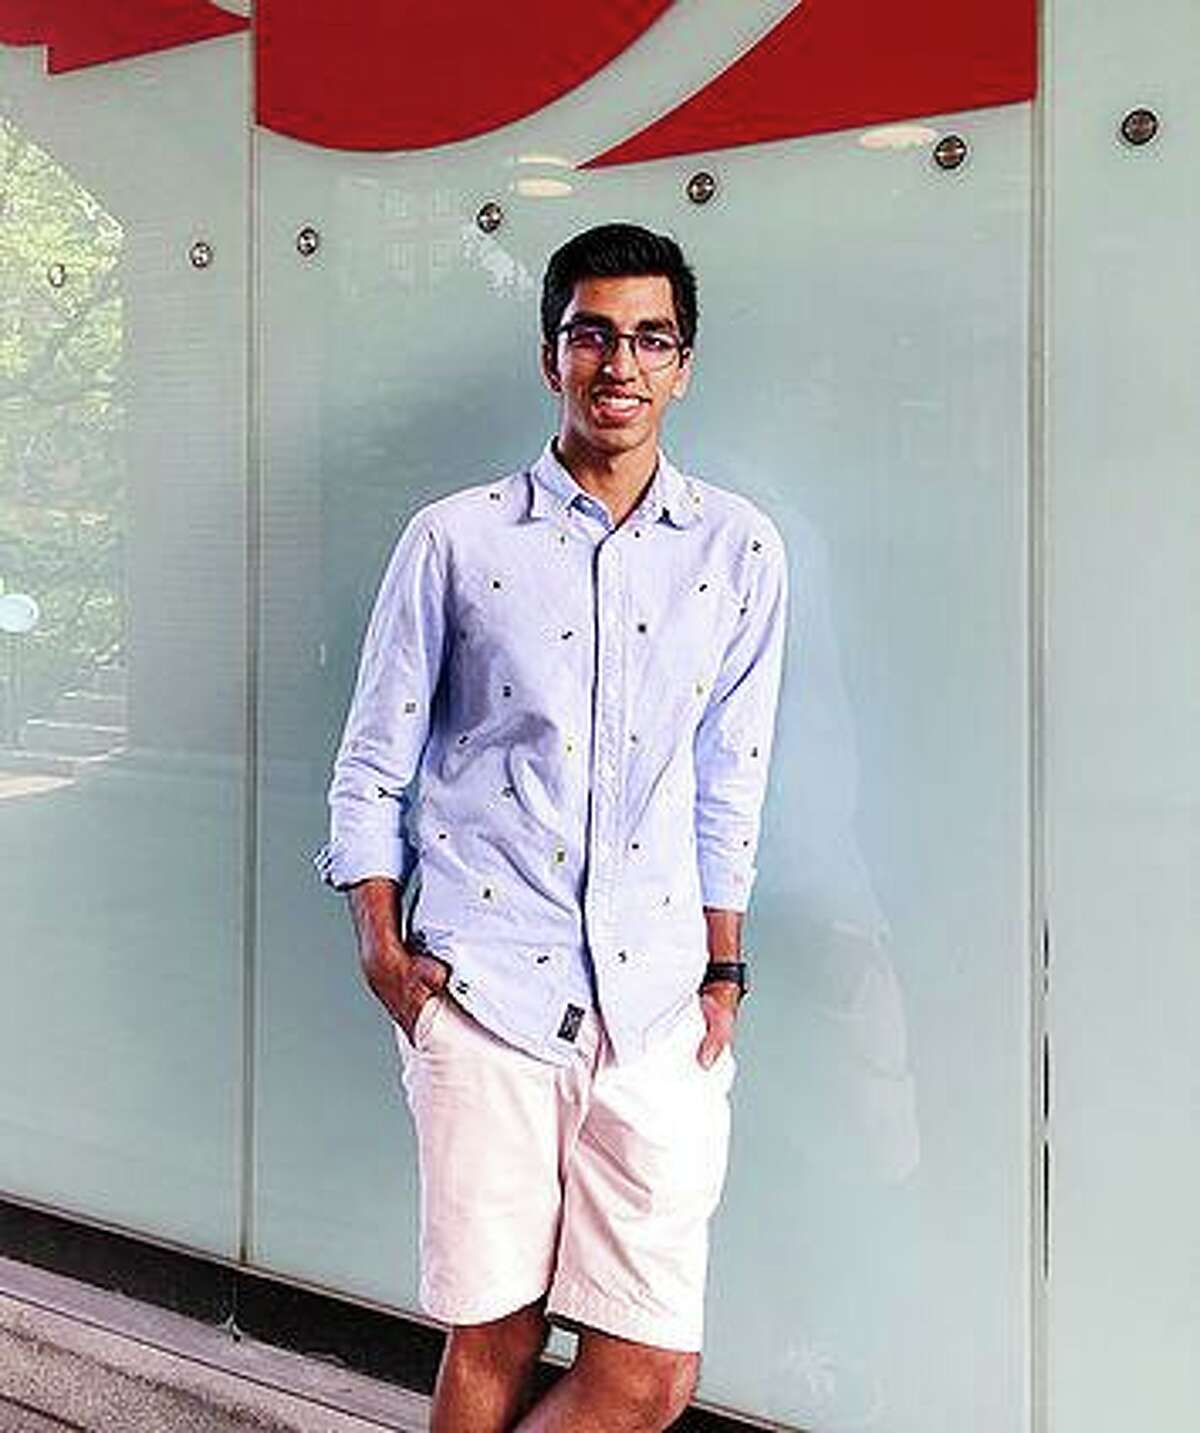 Siddharth Jain, a Shelton High senior, is collecting old iPads, iPhones, Samsung Tablets or other camera-enabled electronics to donate to senior citizens and health care facilities.